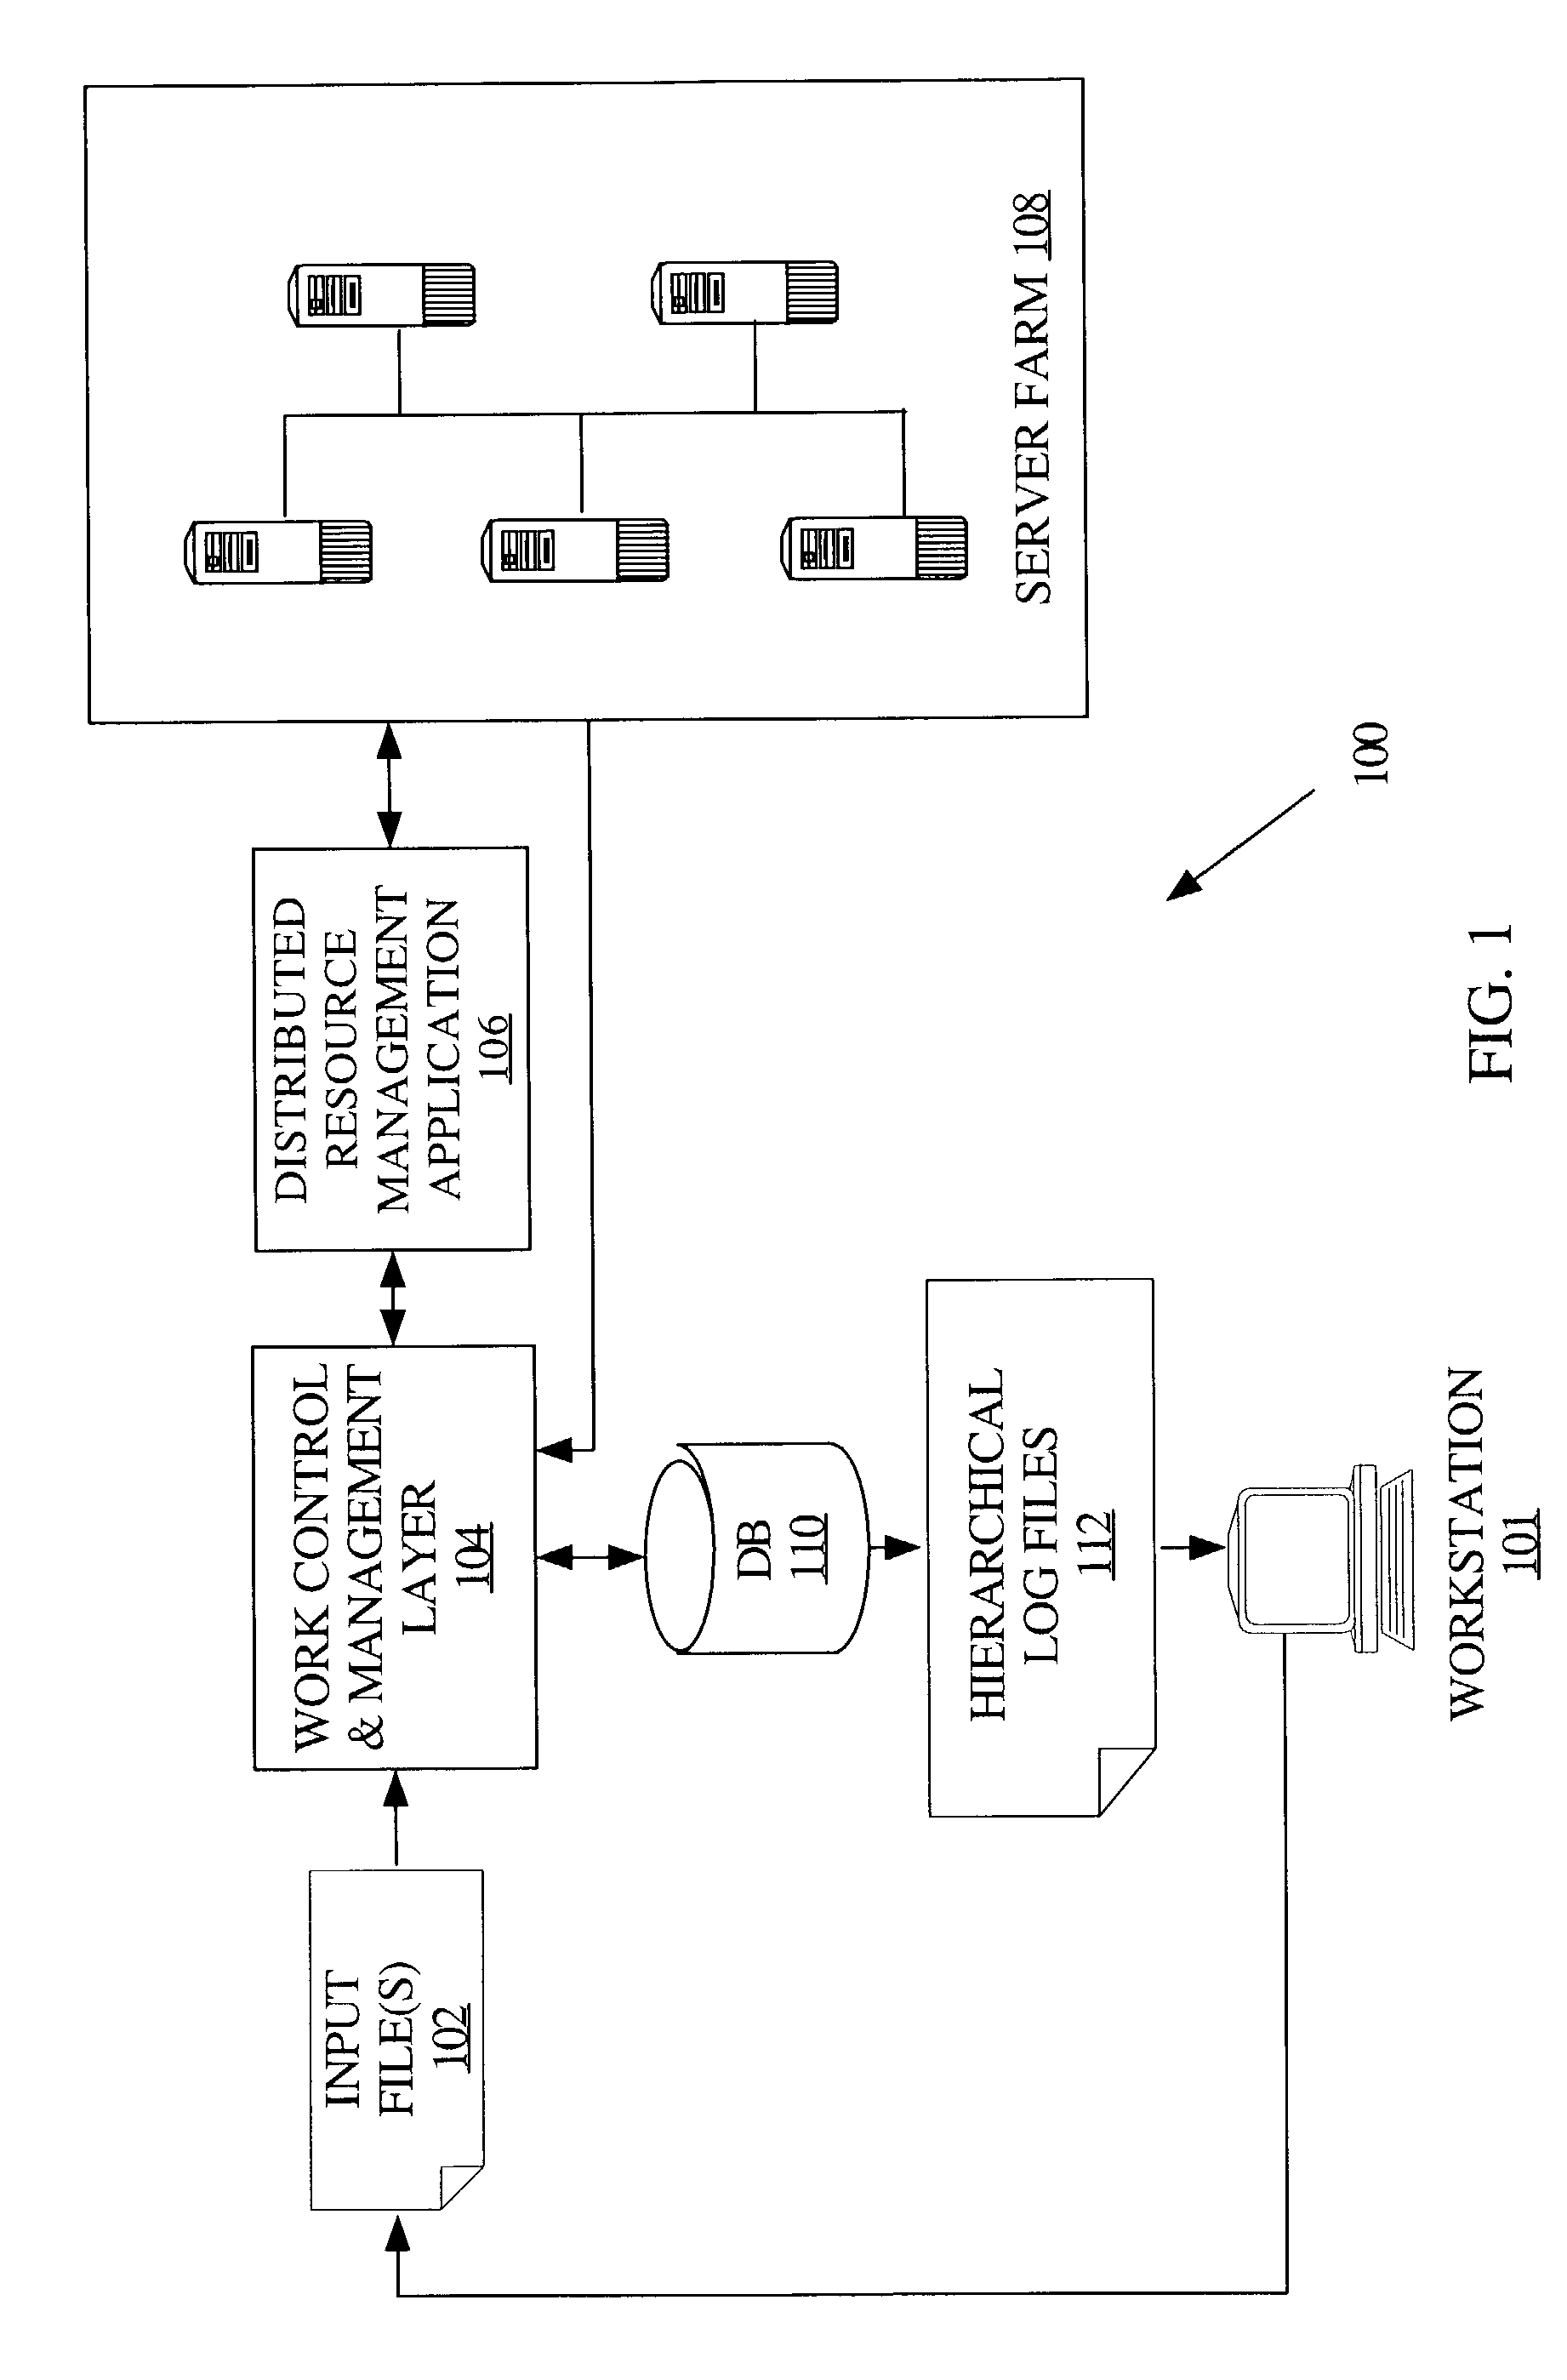 Mechanism for managing parallel execution of processes in a distributed computing environment